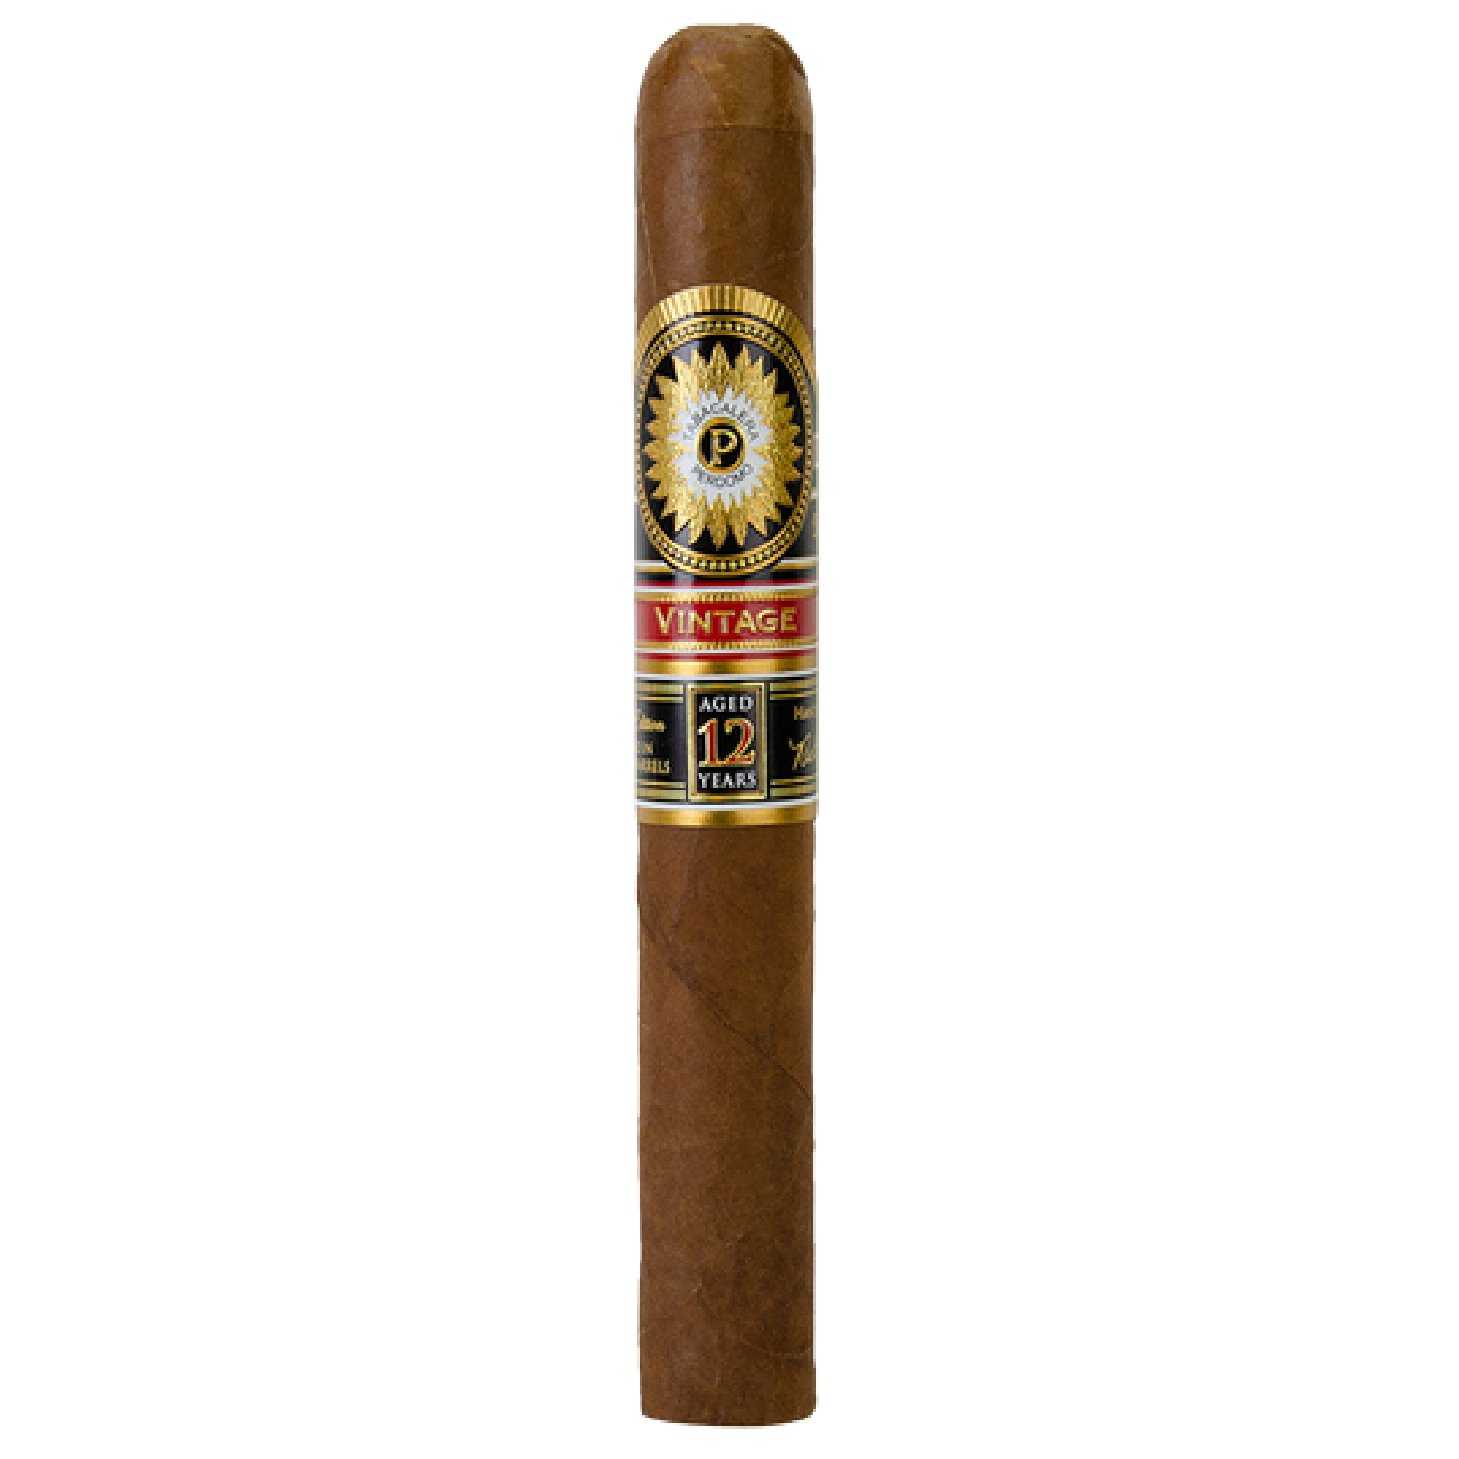 Perdomo Double Aged 12 Year Vintage Churchill Sungrown